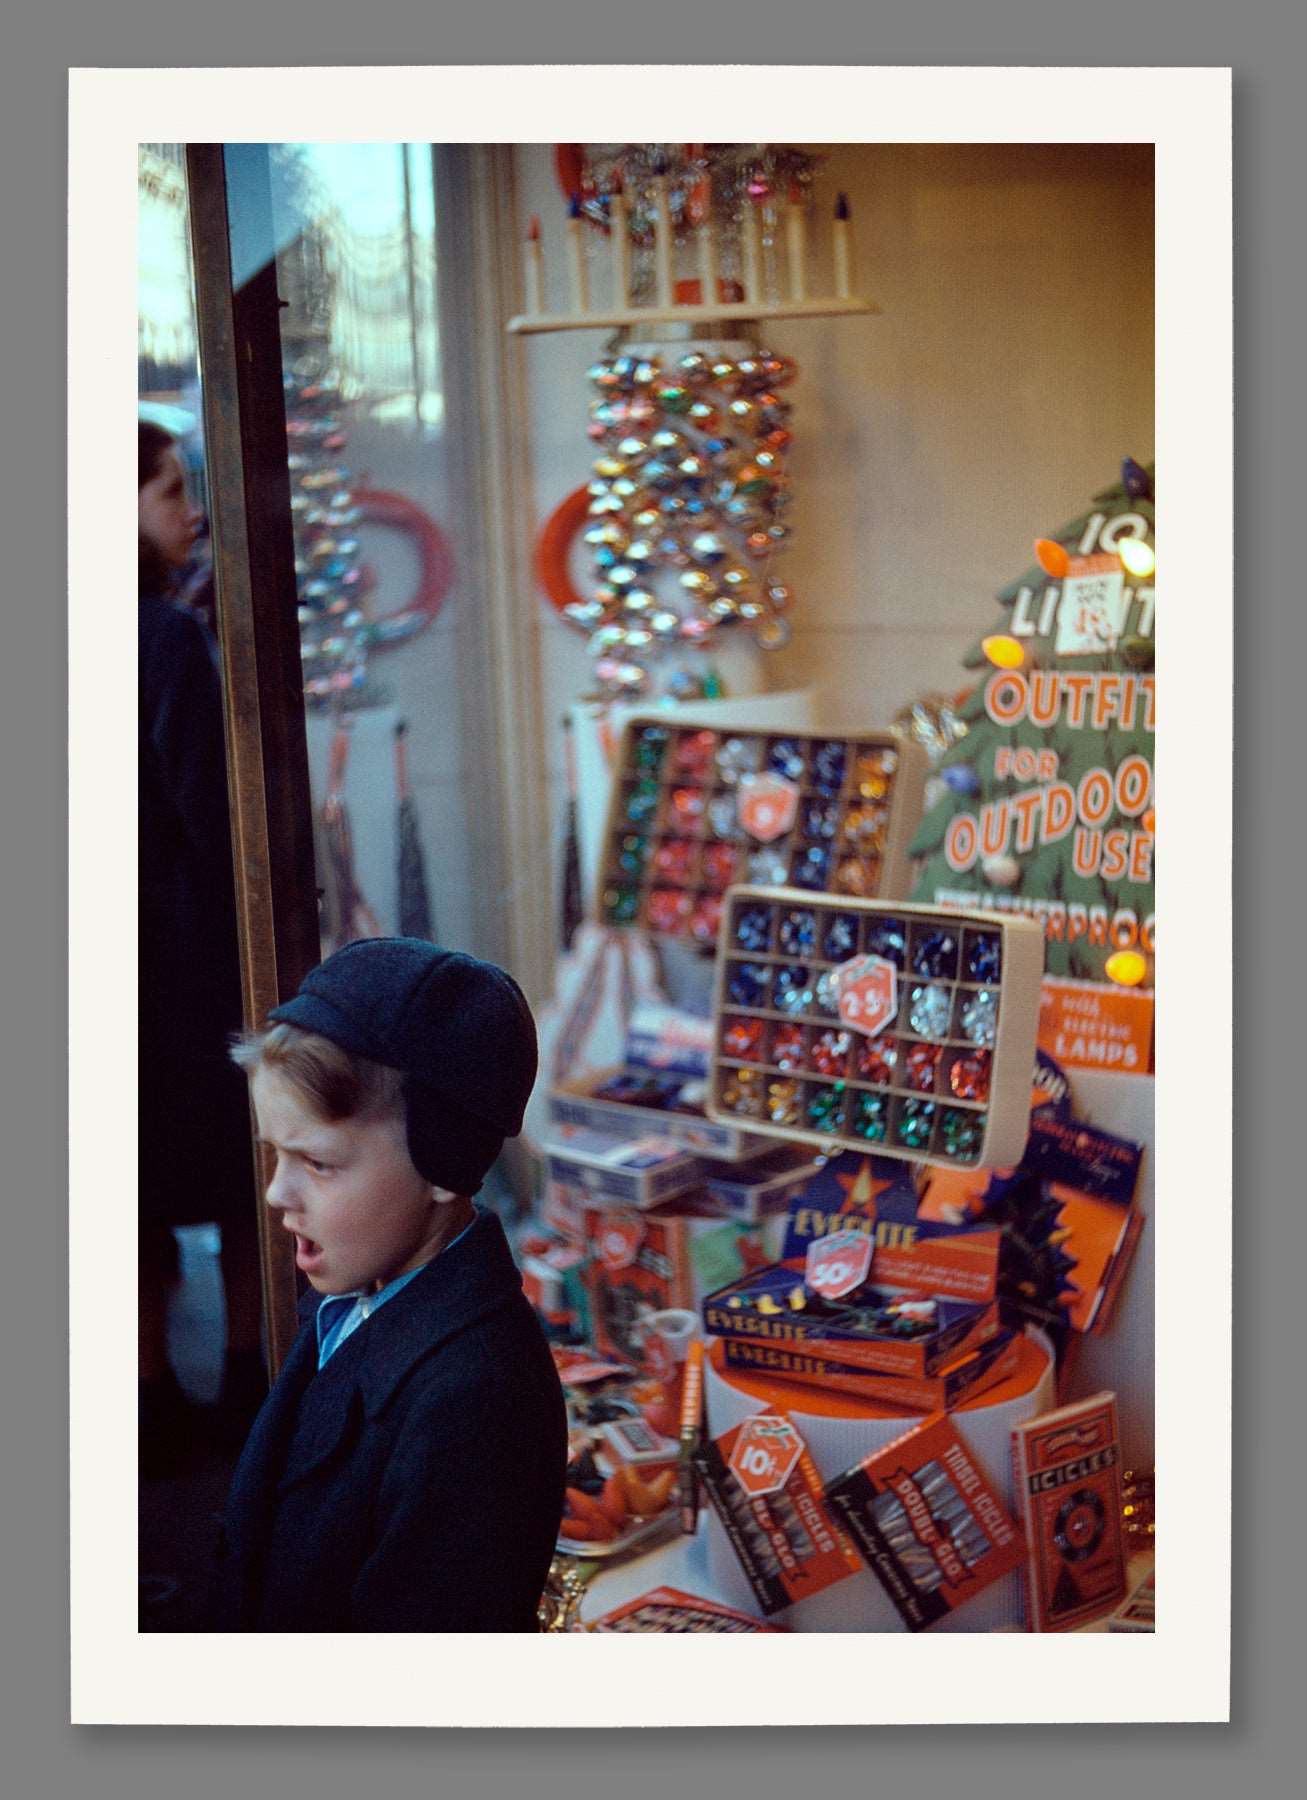 A paper print of a vintage, color image of a Christmas Display in a store window